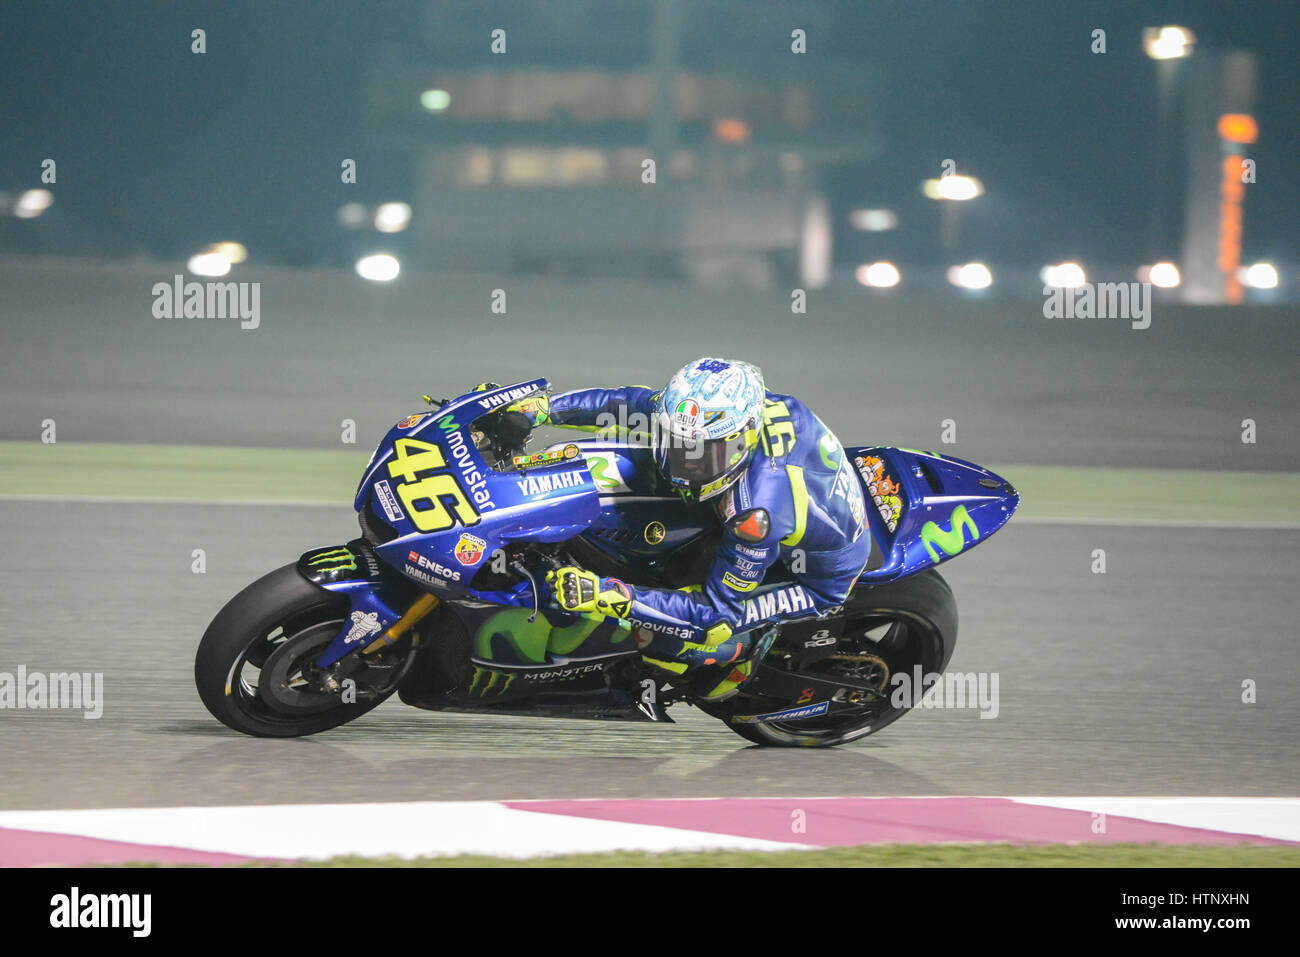 Losail Circuit, Qatar. 12th Mar, 2017. Valentino Rossi who rides for Movistar Yamaha during the final day of the Qatar MotoGP winter test at Losail International Circuit. (c) Gina Layva/Alamy Stock Photo